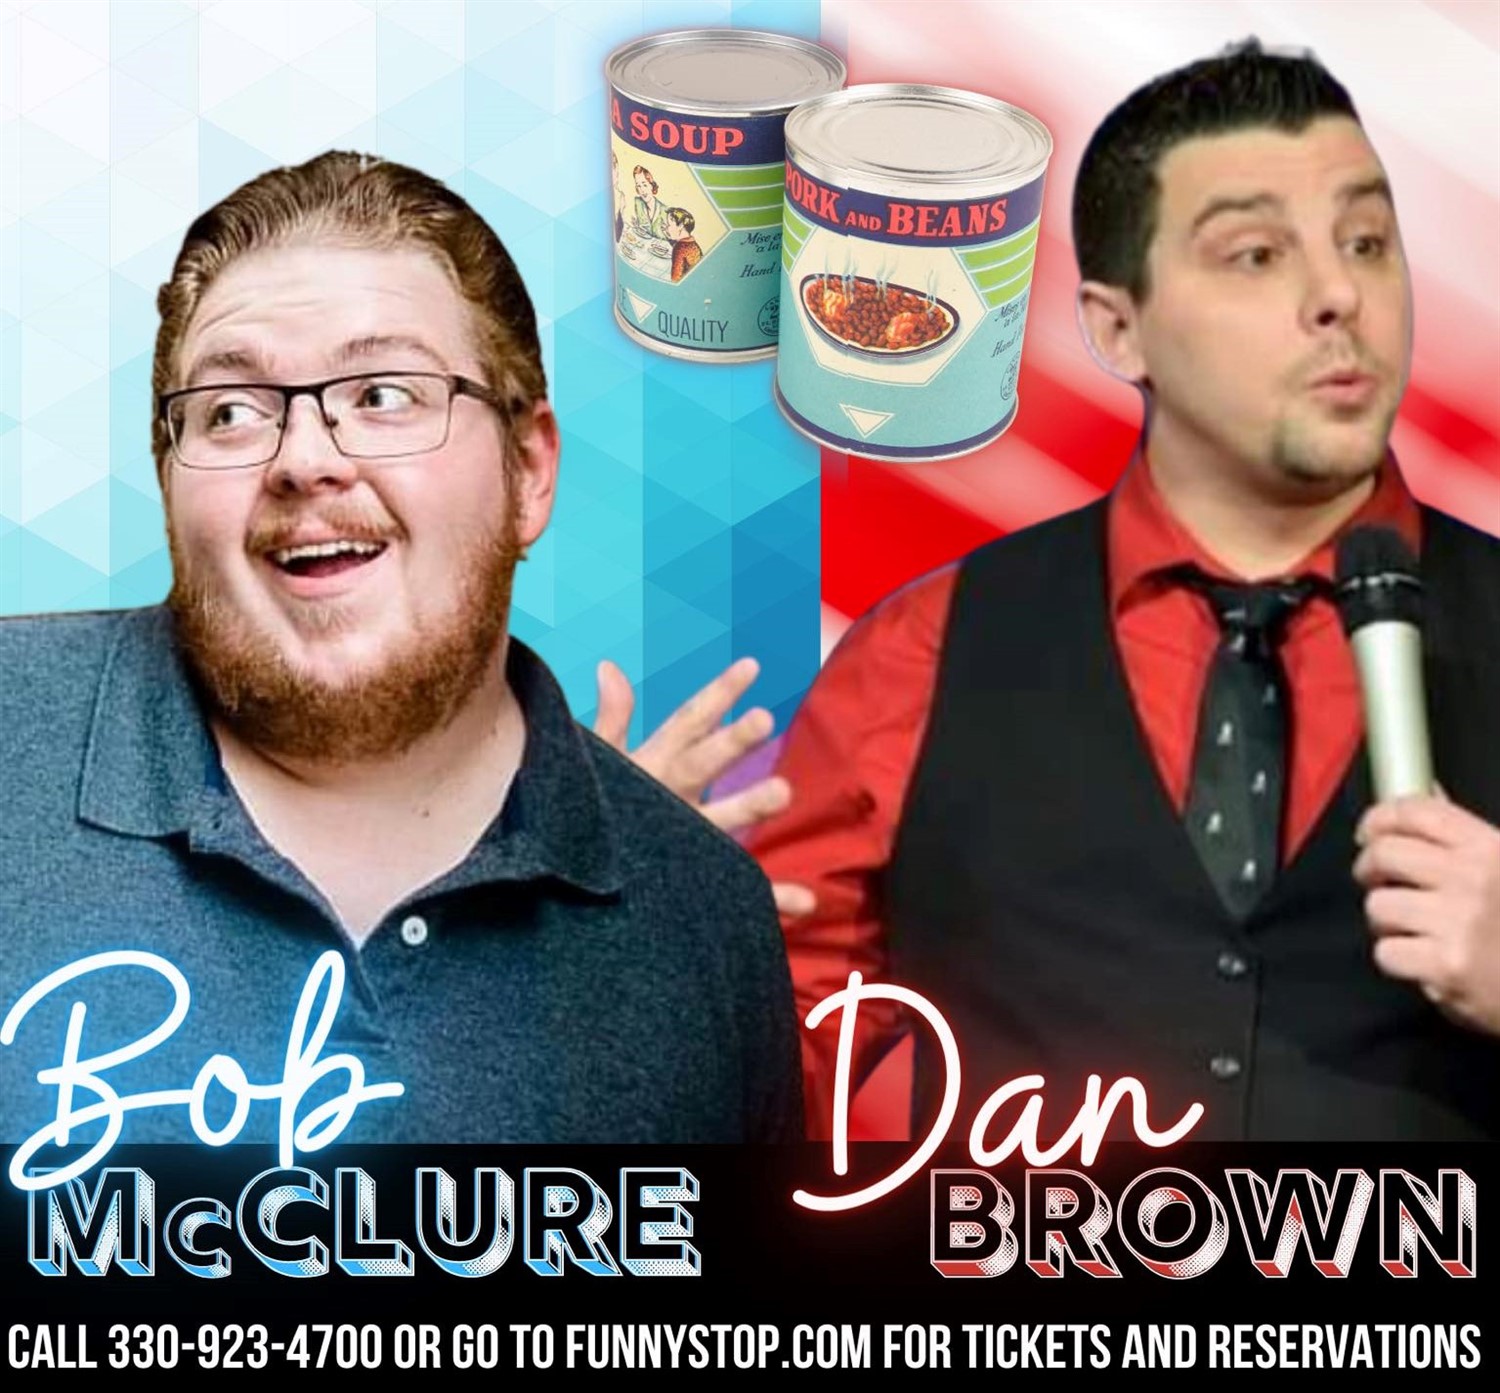 Bob McClure and Dan Brown 9:20pm show Funny Stop Comedy Club on Dec 16, 21:20@Funny Stop Comedy Club - Buy tickets and Get information on Funny Stop funnystop.online